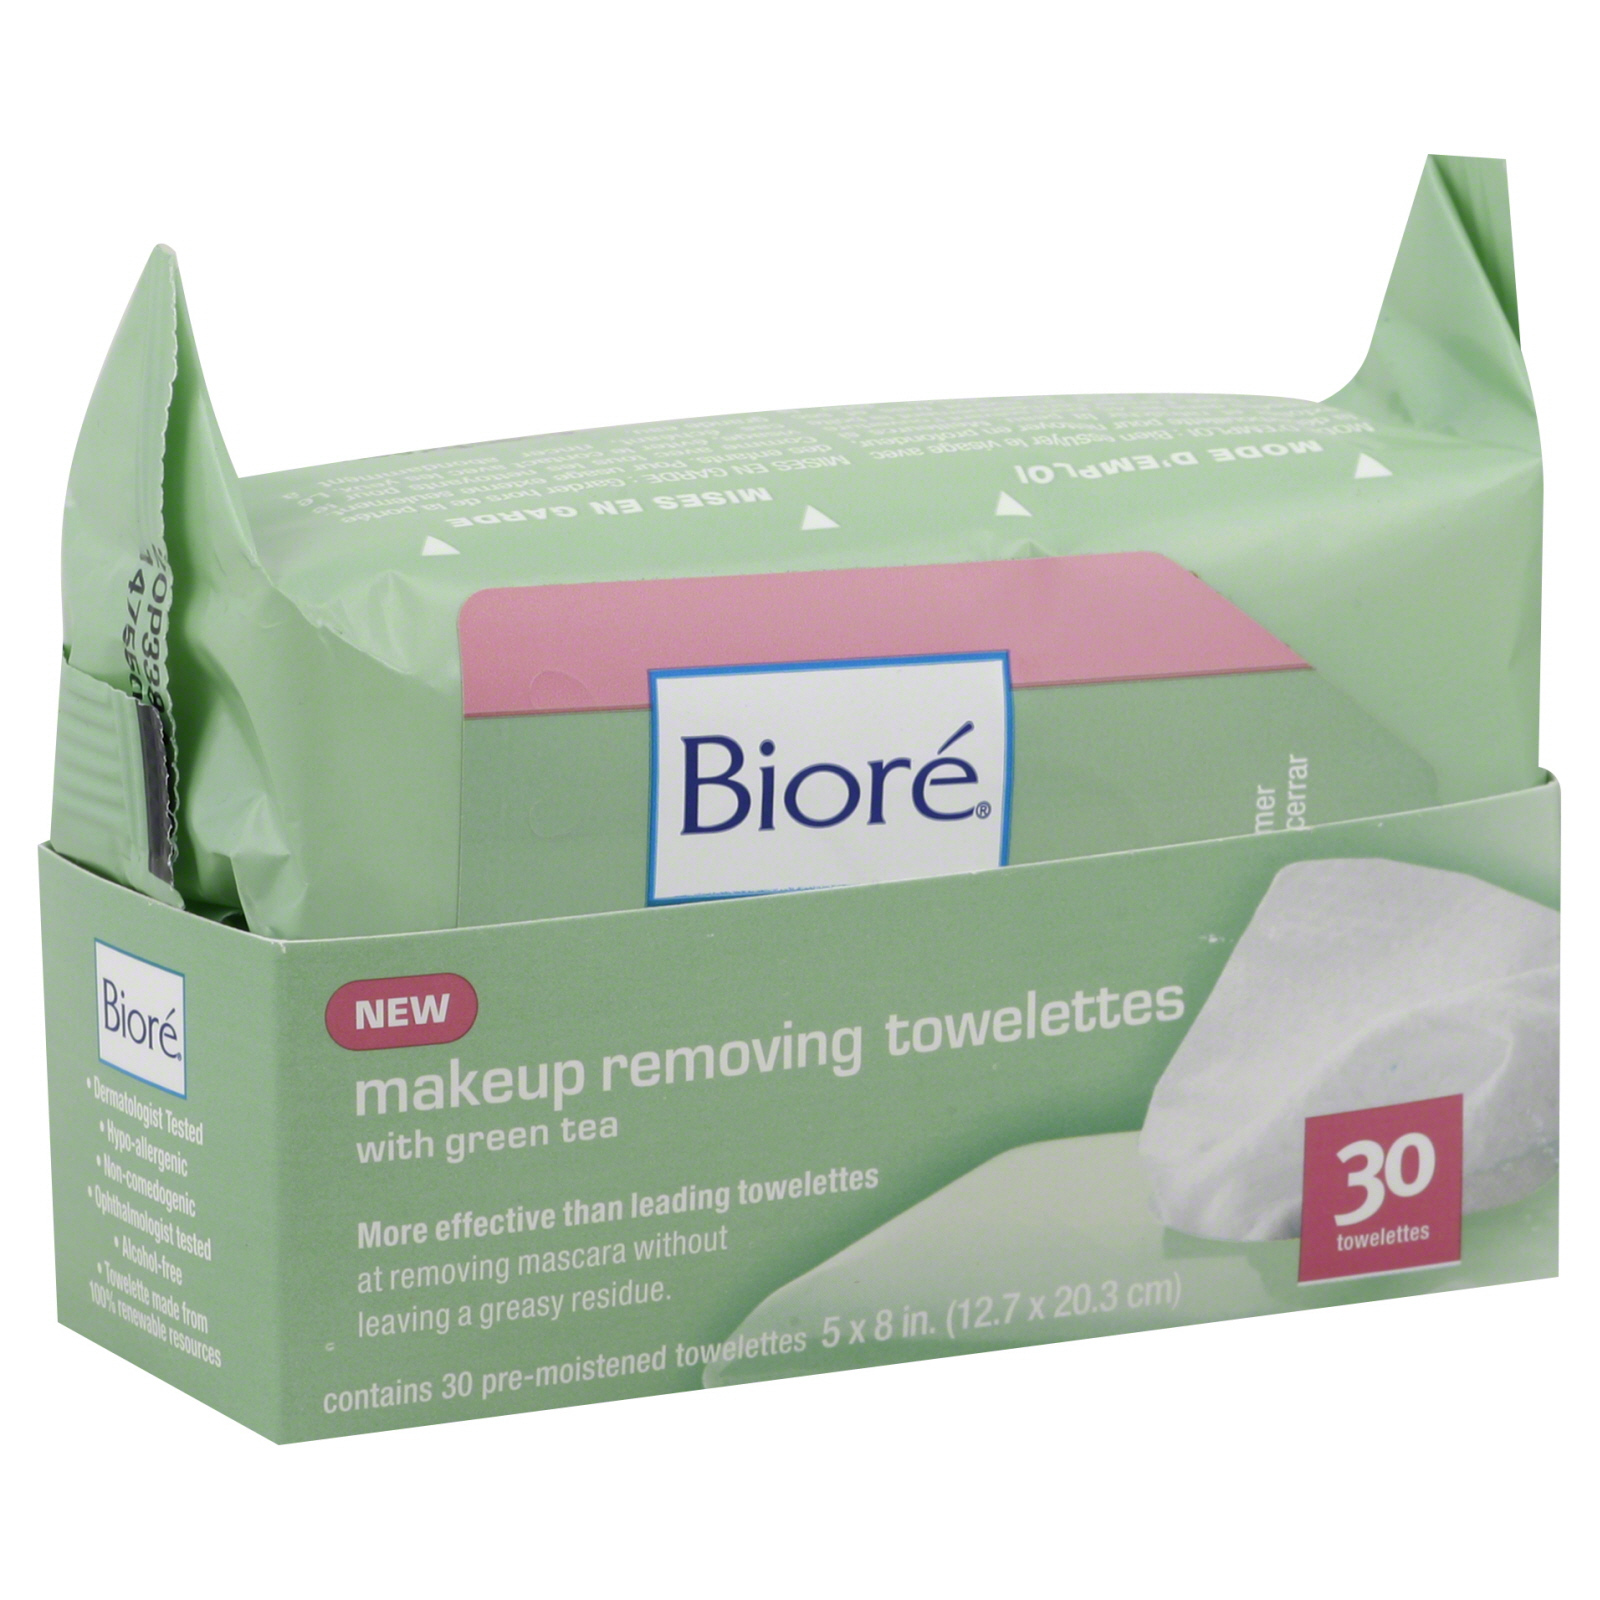 Biore Makeup Removing Towelettes, with Green Tea 30 towelettes